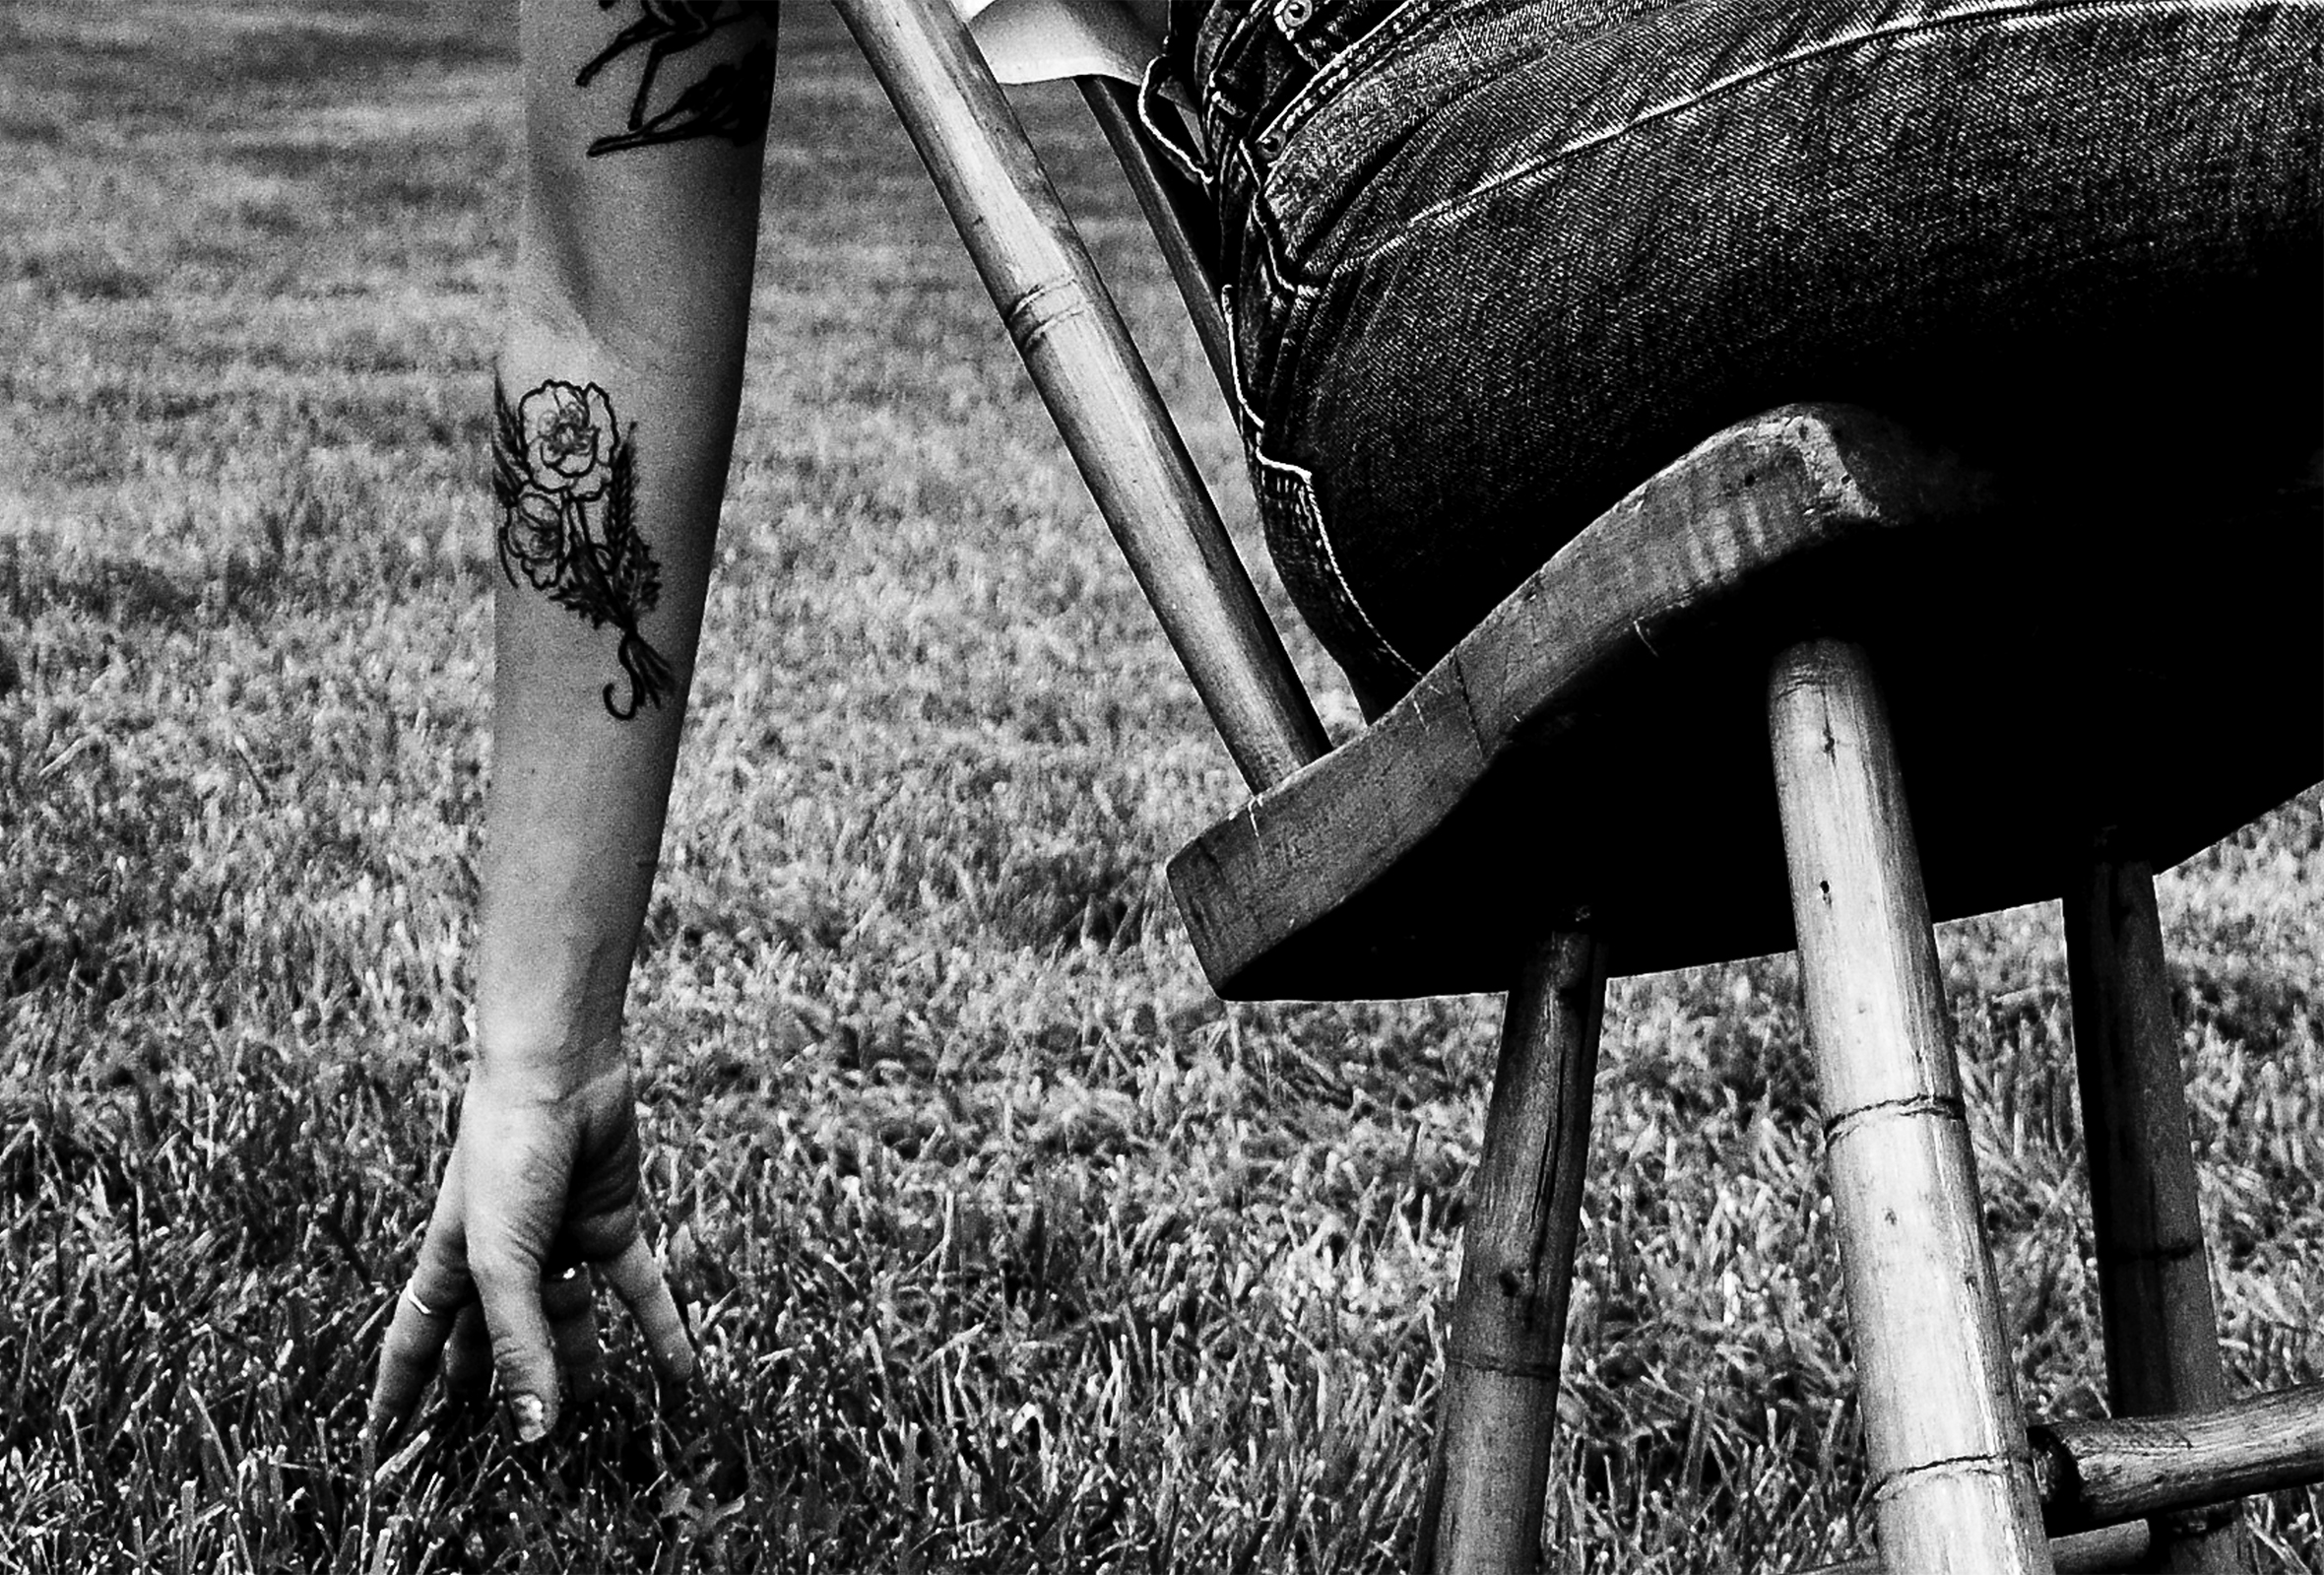 A woman in jeans with a large flower tattoo on her forearm and another tattoo on her upper arm sits on a wooden spindle-back chair in the grass and leans so far back that her fingertips are braced against the ground.